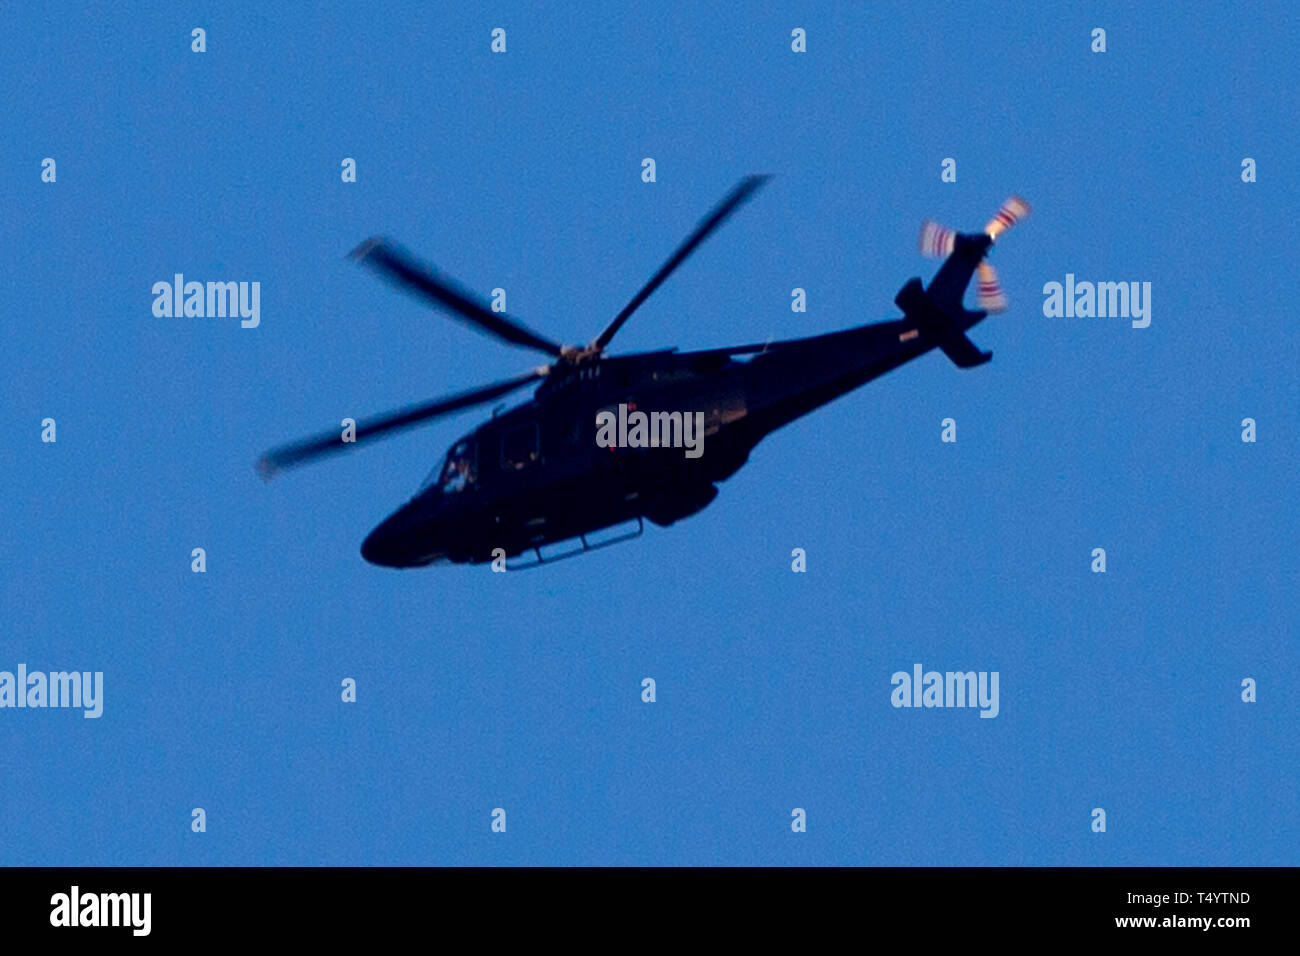 Agusta,Helicopter,seen through,heat,haze,flying,blue,sky,Isle of Wight, England, UK, Stock Photo